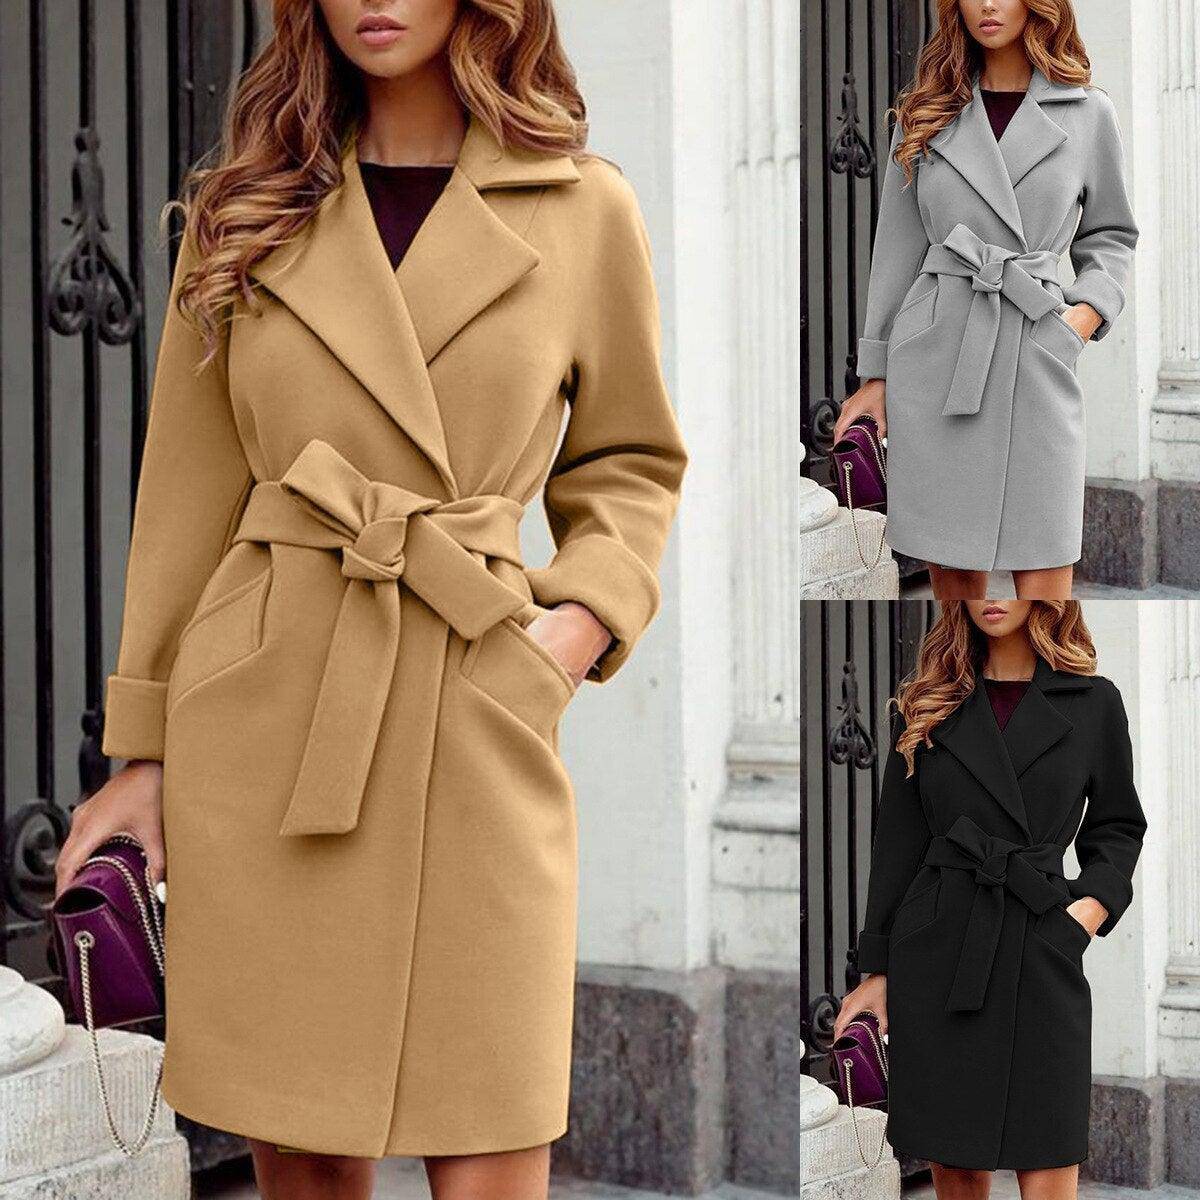 Charlotte Women's Shawl Collar Lapel Trench Jacket Belted Wrap Coat